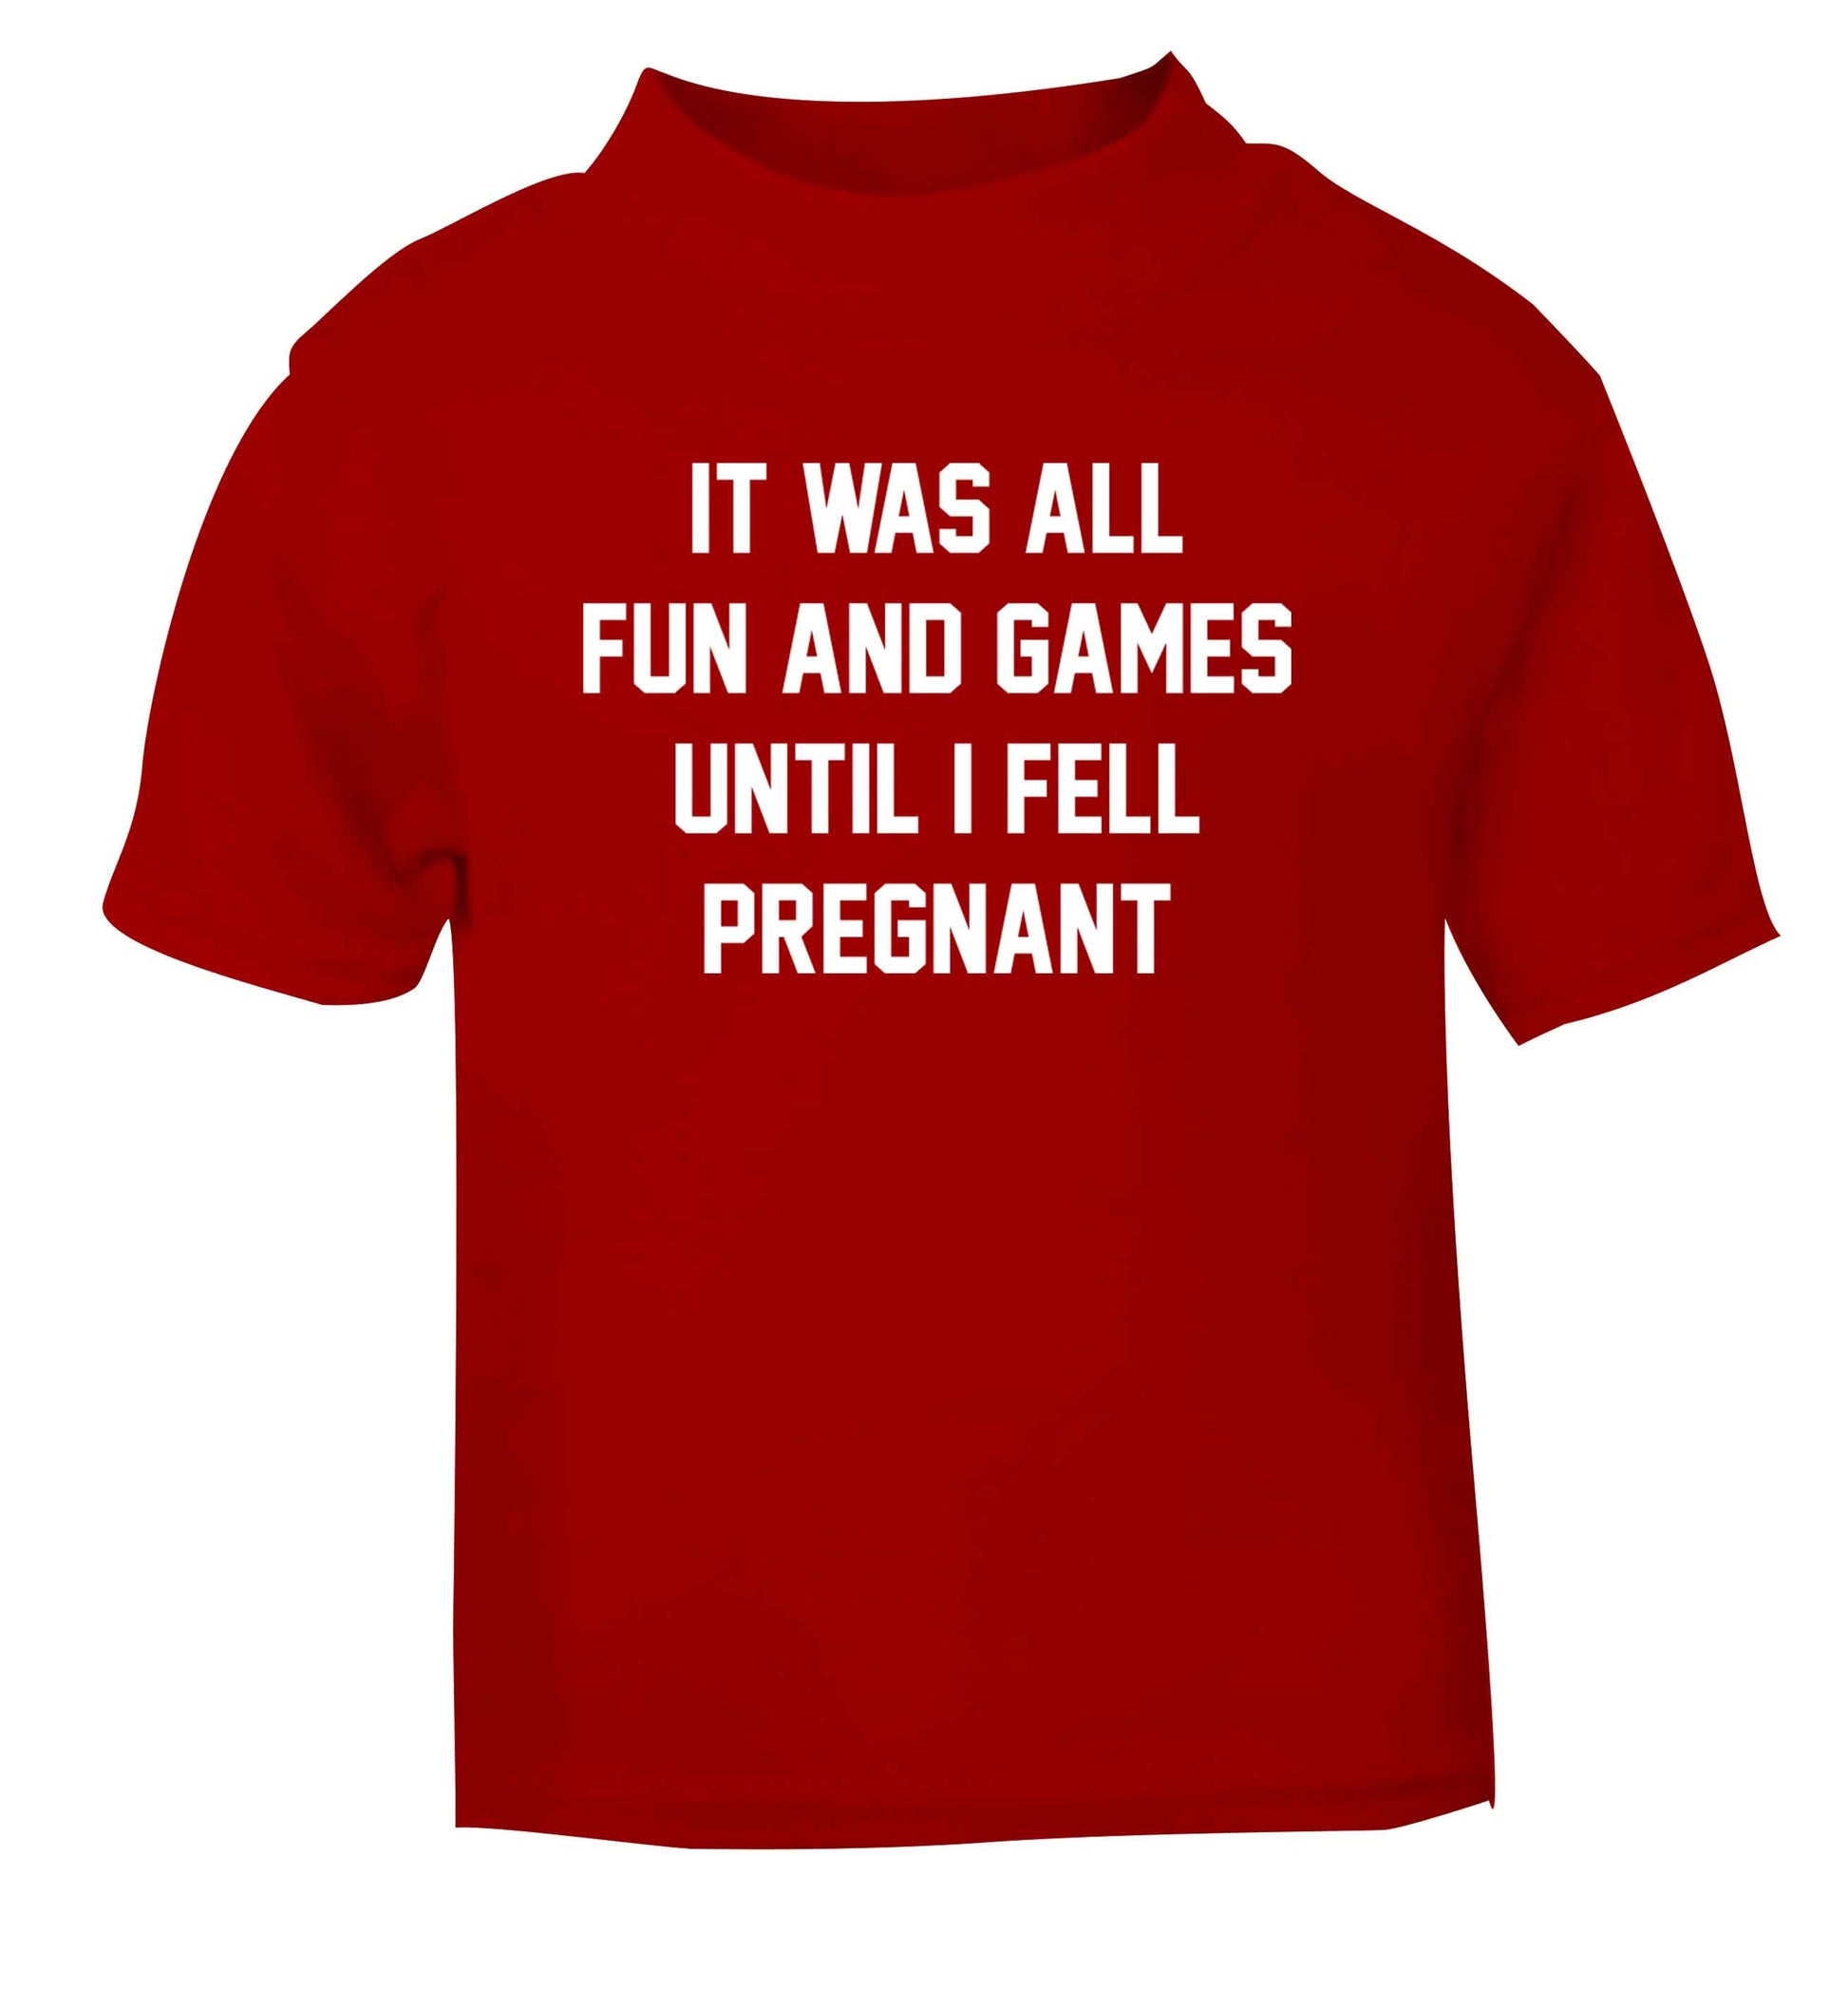 It was all fun and games until I fell pregnant kicks red Baby Toddler Tshirt 2 Years